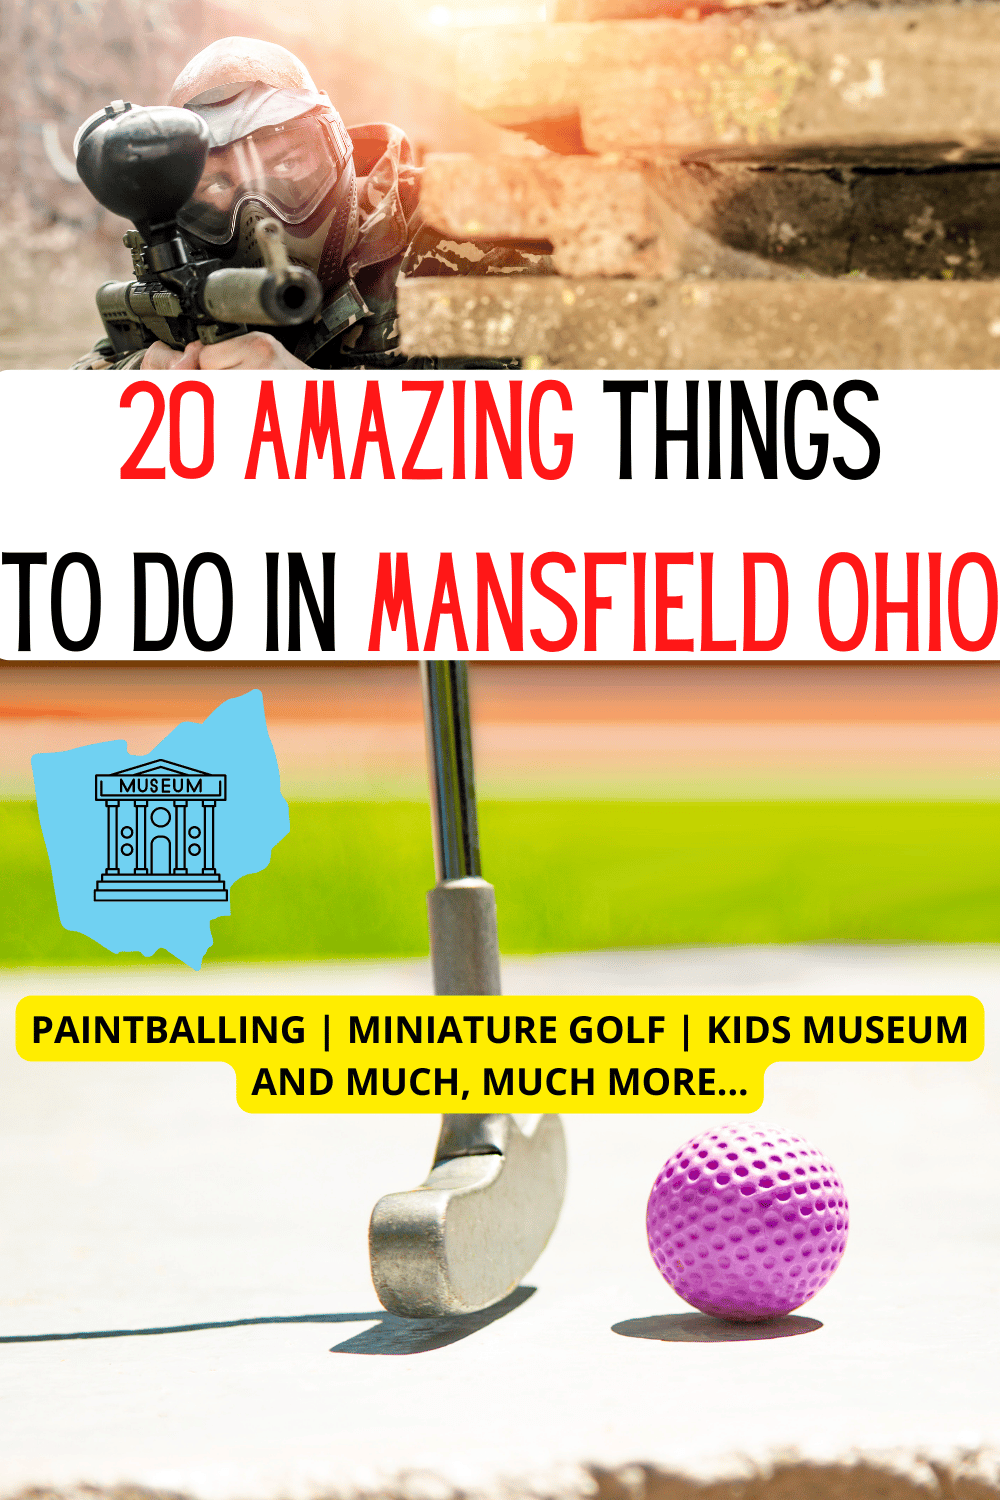 Looking for things to do in Mansfield Ohio? We have over 20 fun and some unusual activities for you while you are in the area!  #MansfieldOhio #shawshank #shawshankredemption #ohioreformatory #visitohio #ohio